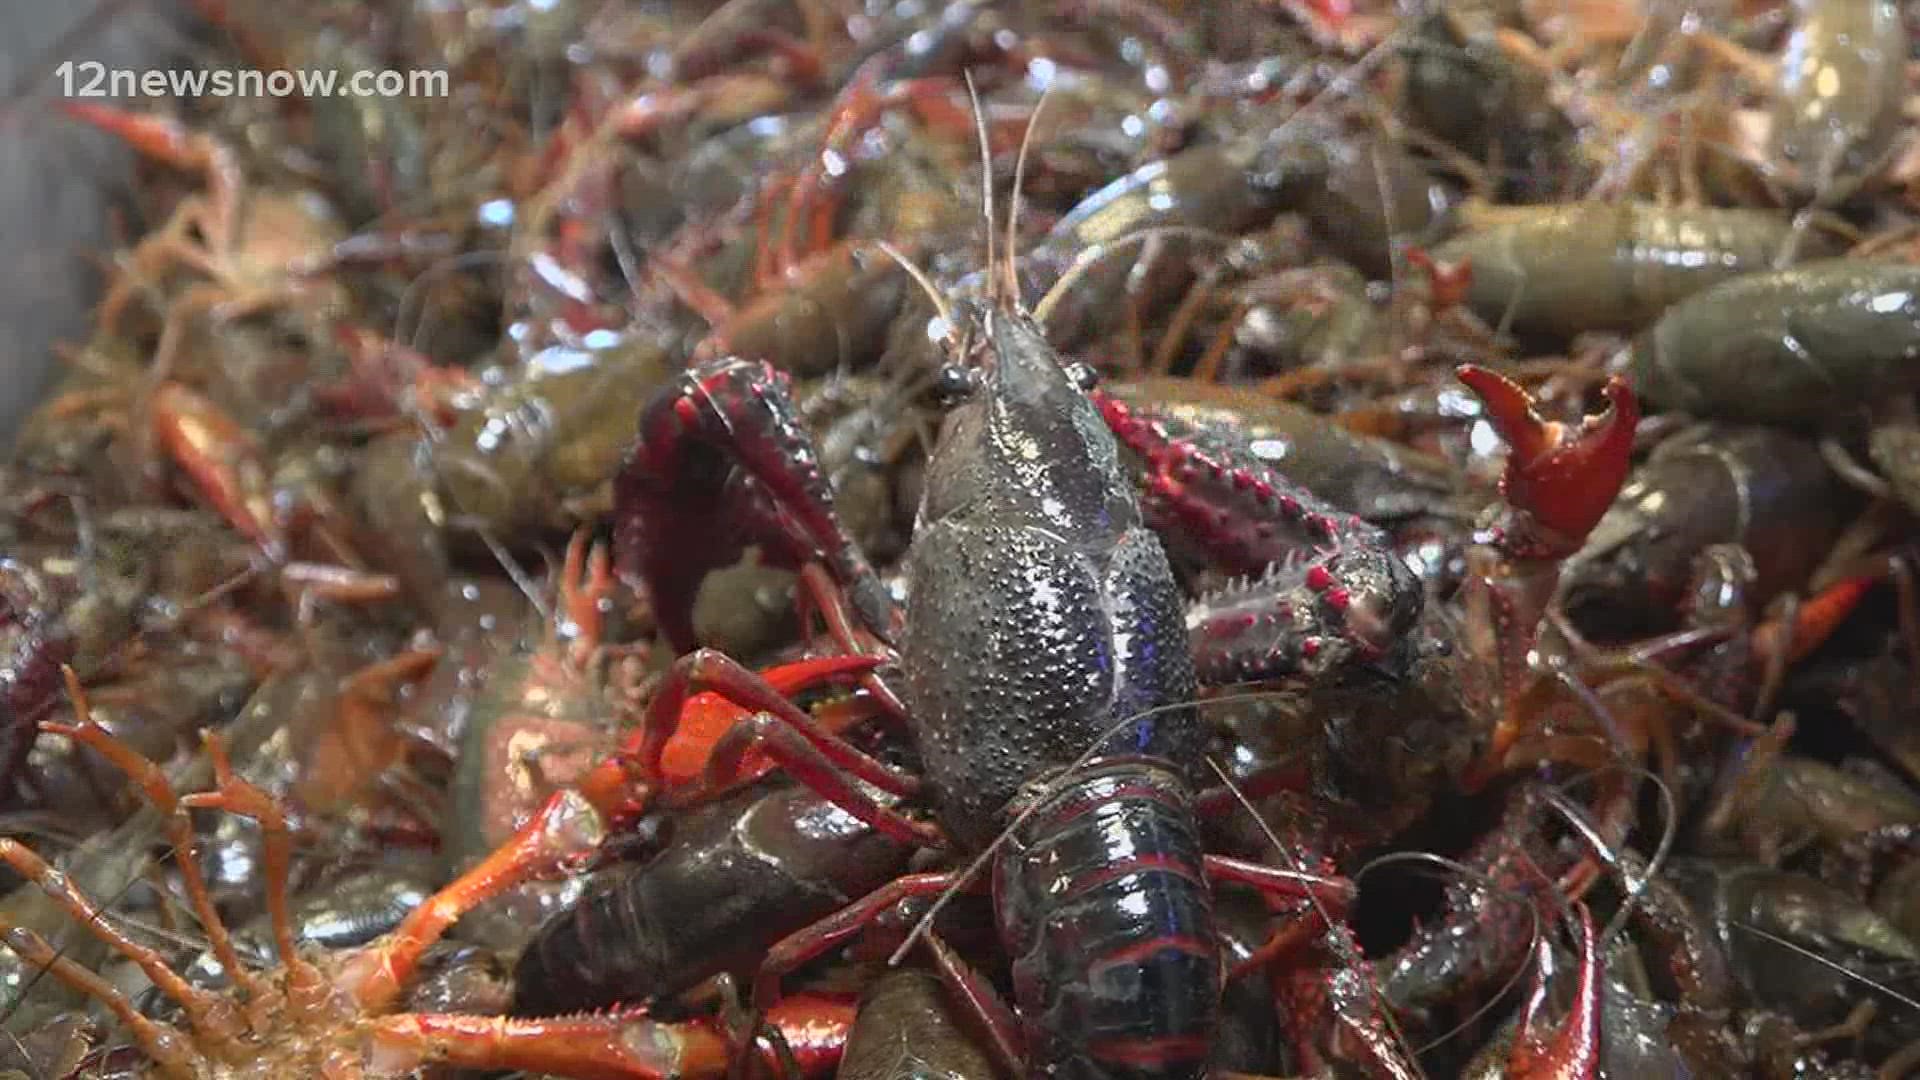 Boiling crawfish at this time of the year is a tradition for some Southeast Texas families. Buyers have reported paying as much as $10 per pound.